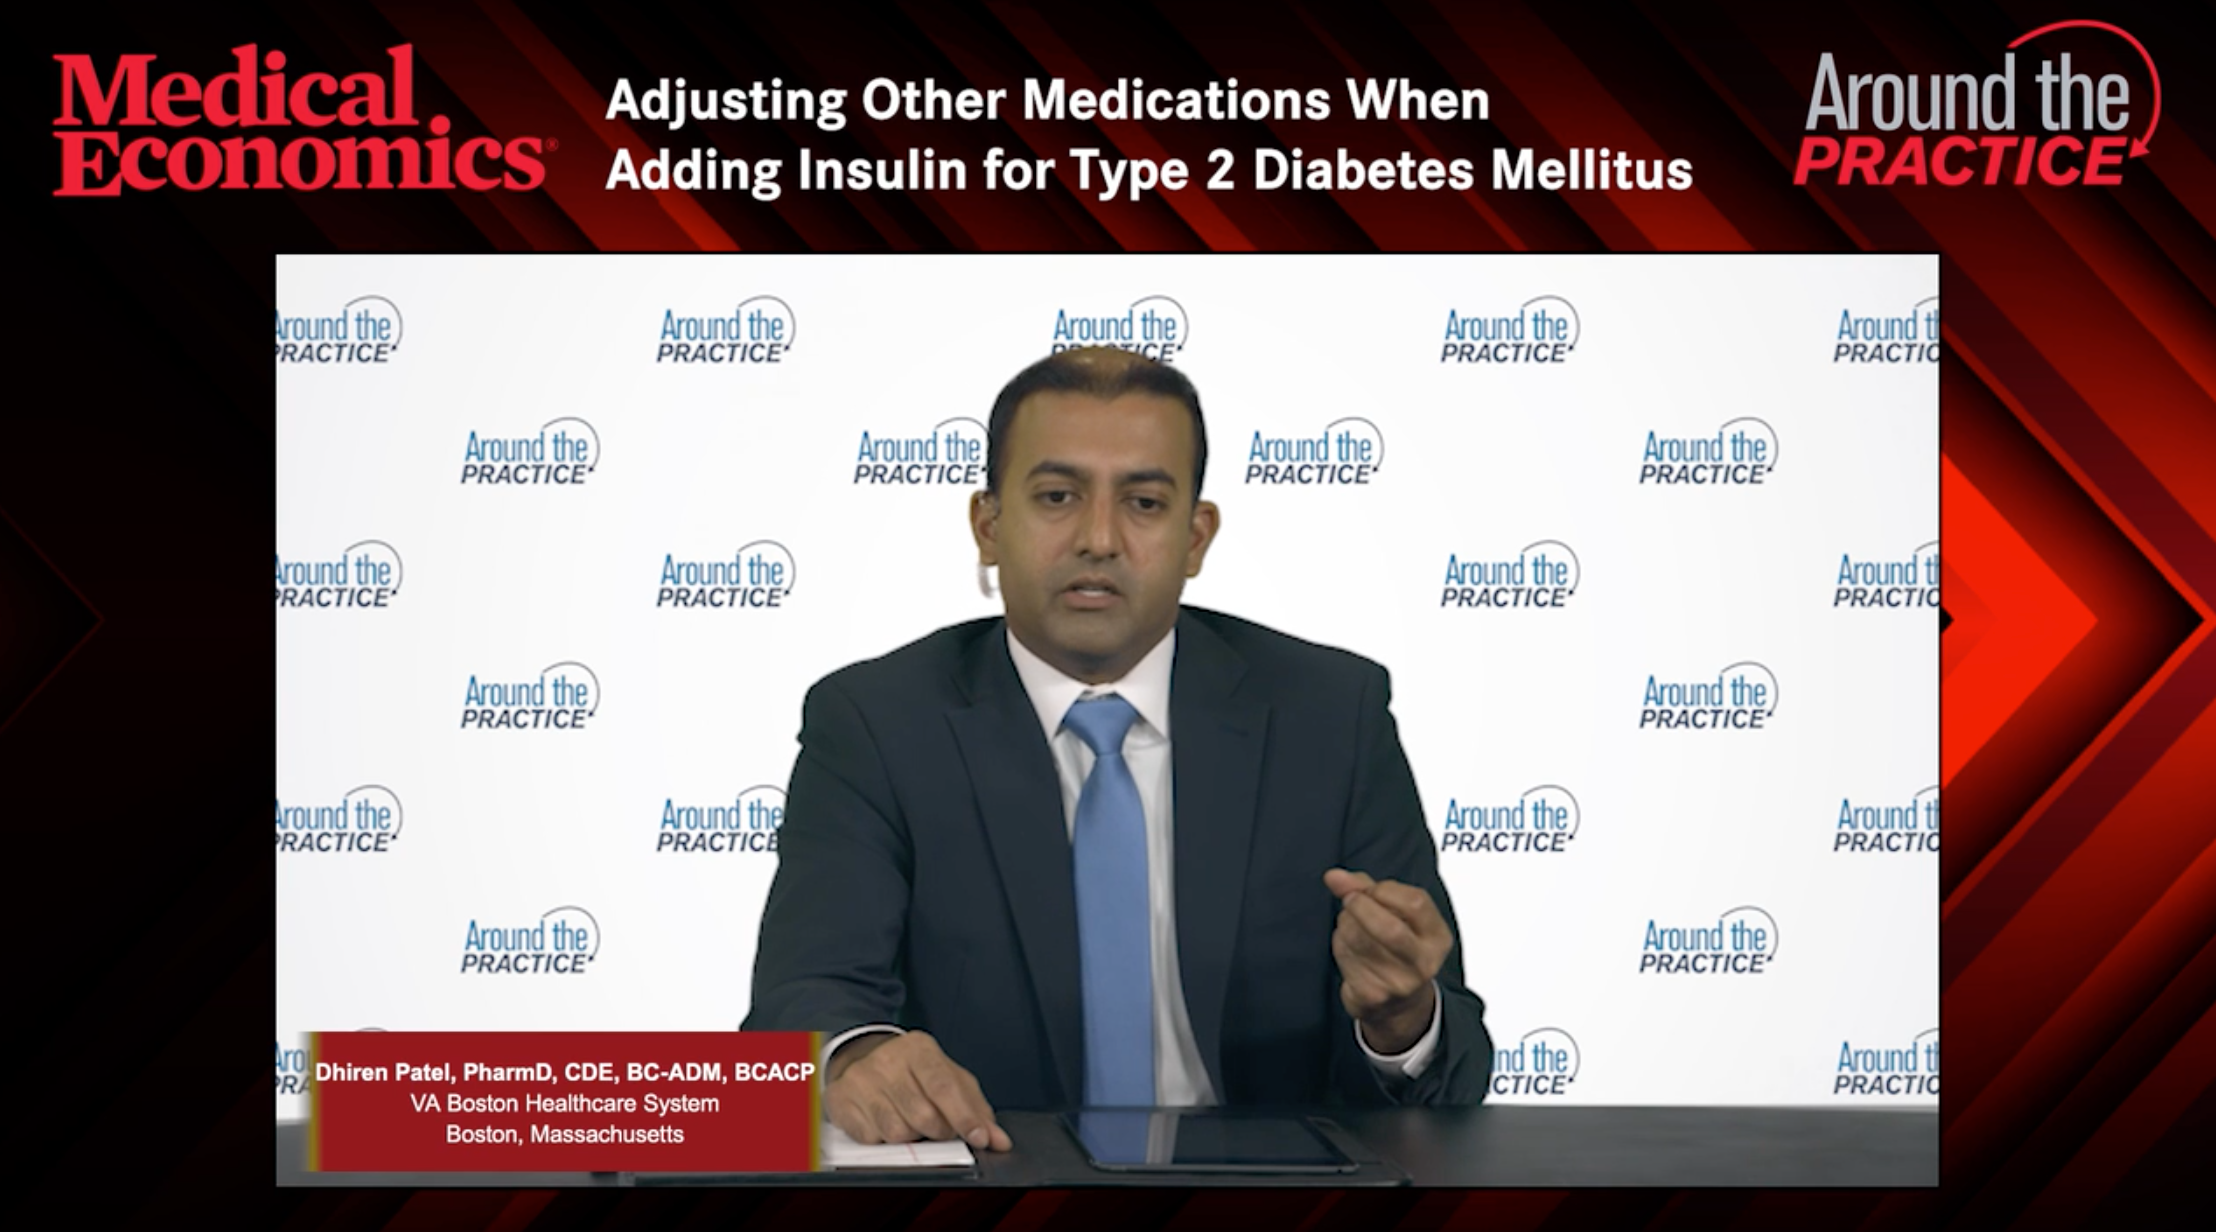 Adjusting other medications when adding insulin for Type 2 Diabetes Mellitus